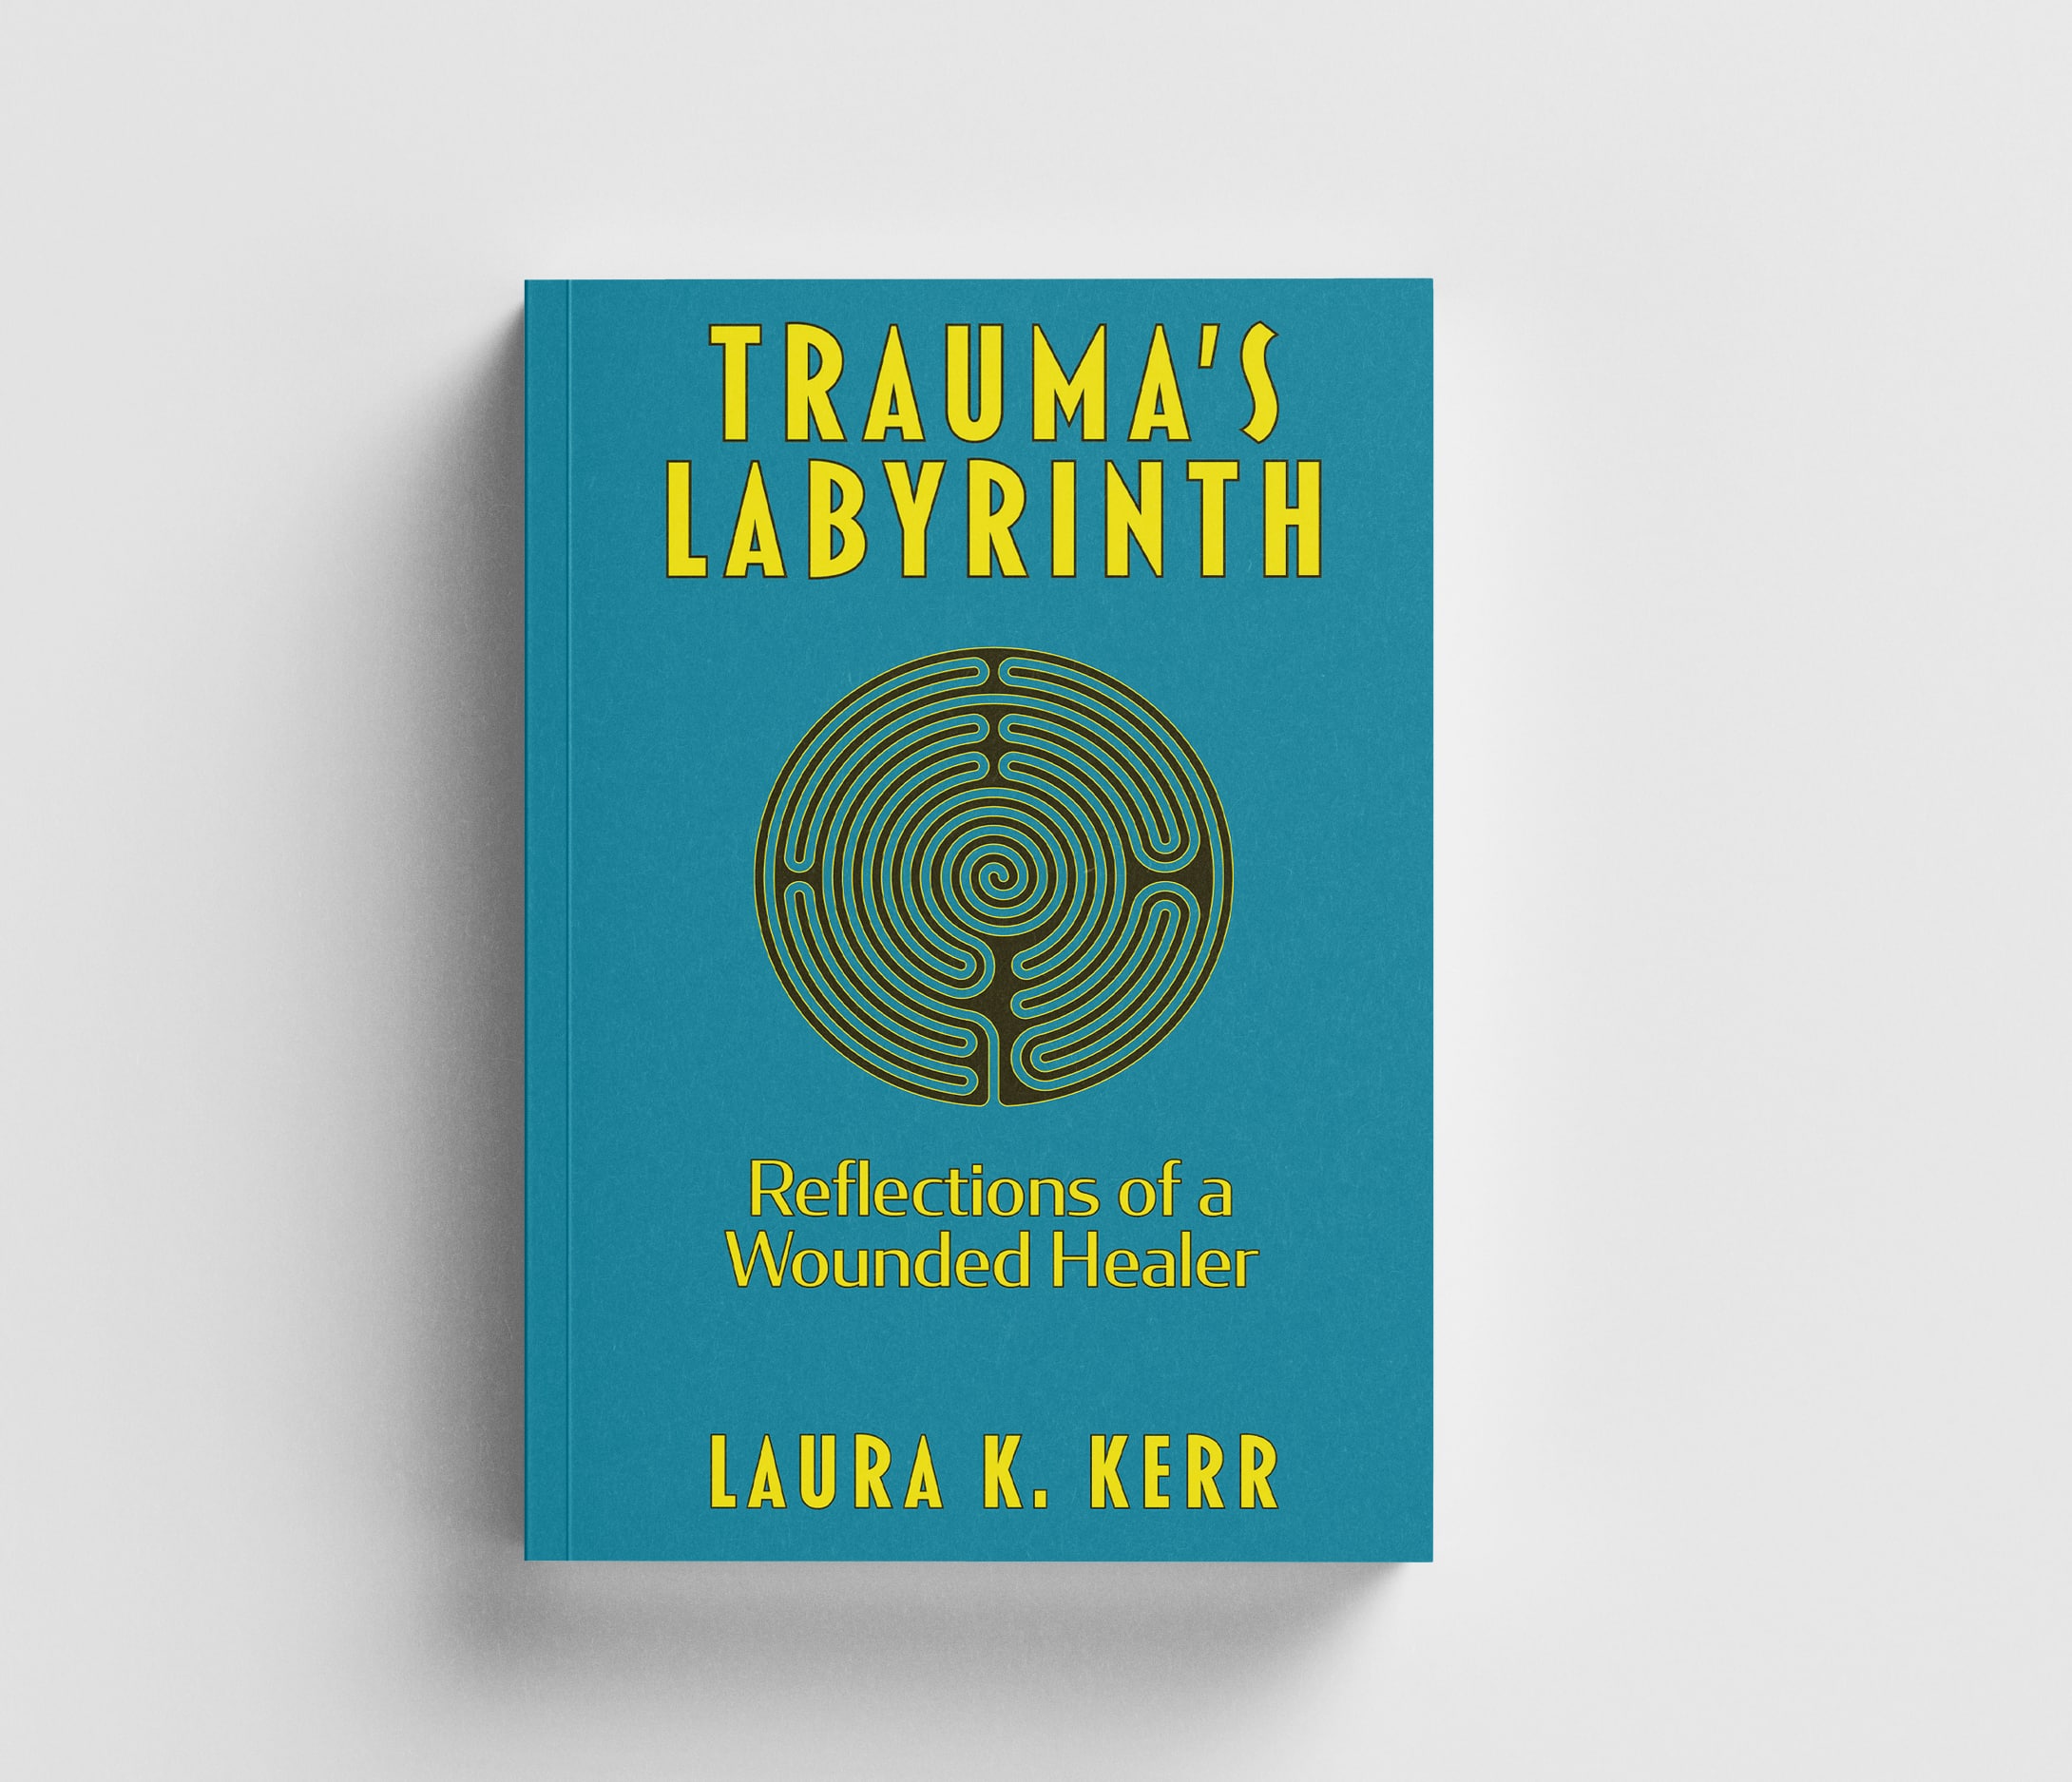 Book cover image for "Trauma's Labyrinth: Reflections of a Wounded Healer," by Laura K. Kerr.